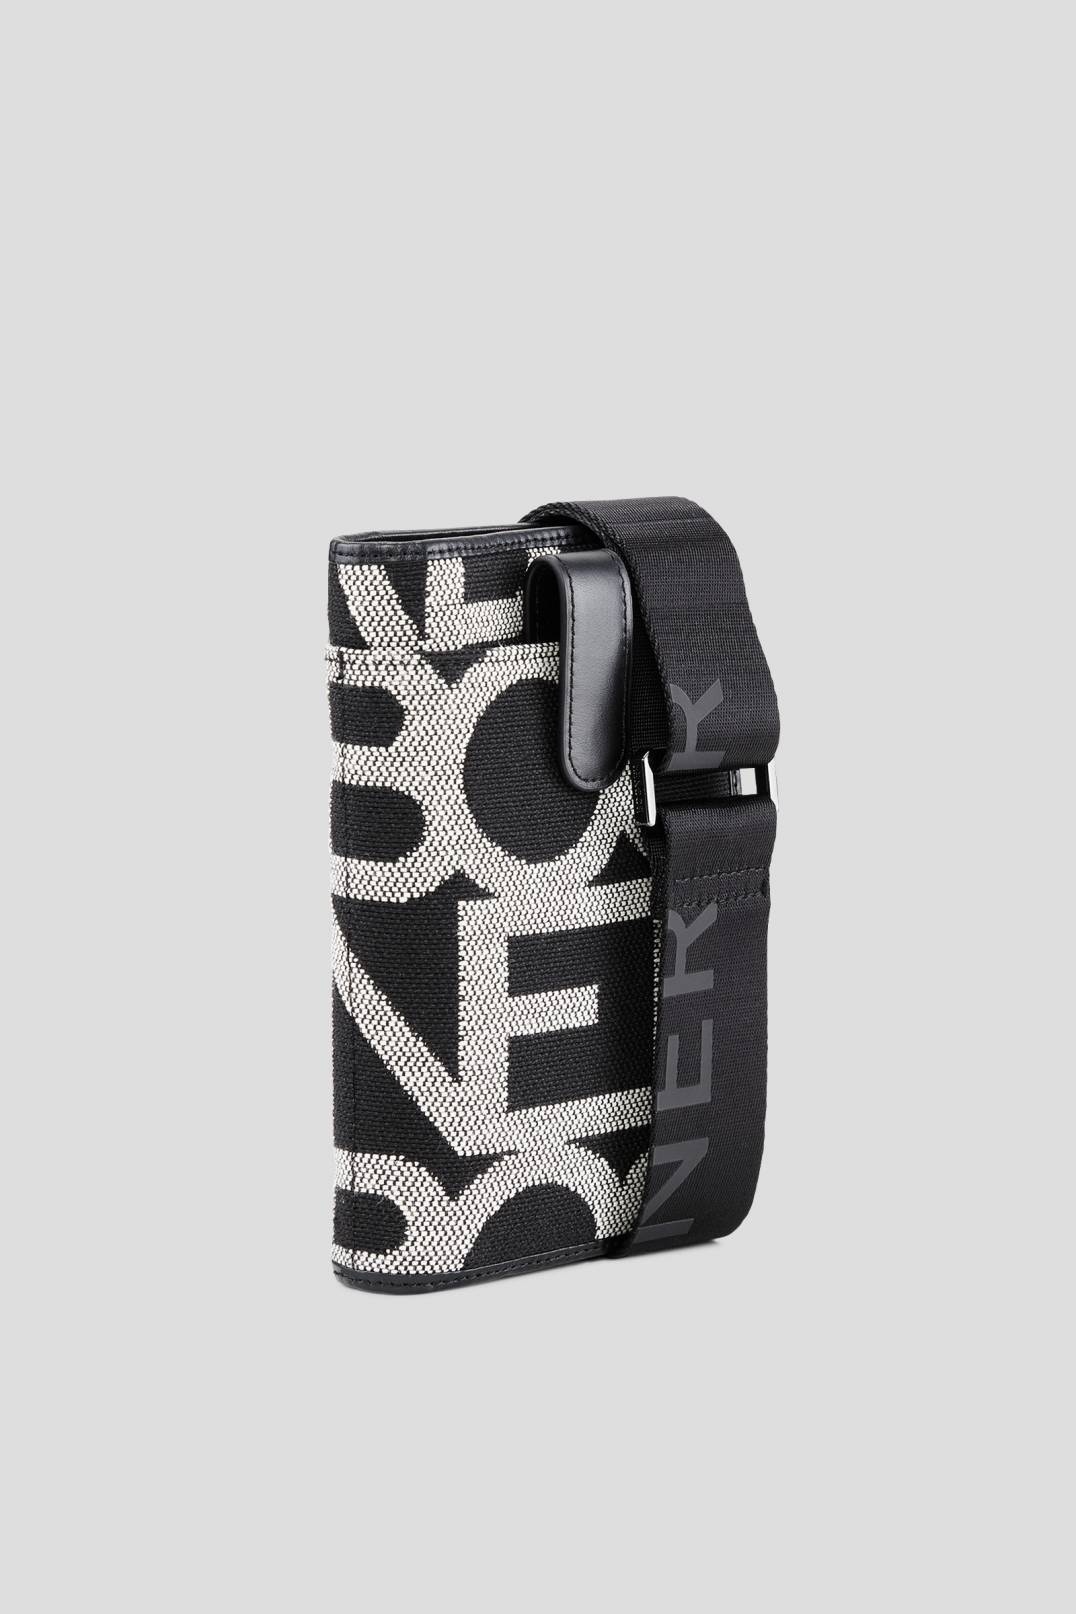 PANY NOMI SMARTPHONE POUCH IN BLACK/WHITE - 2